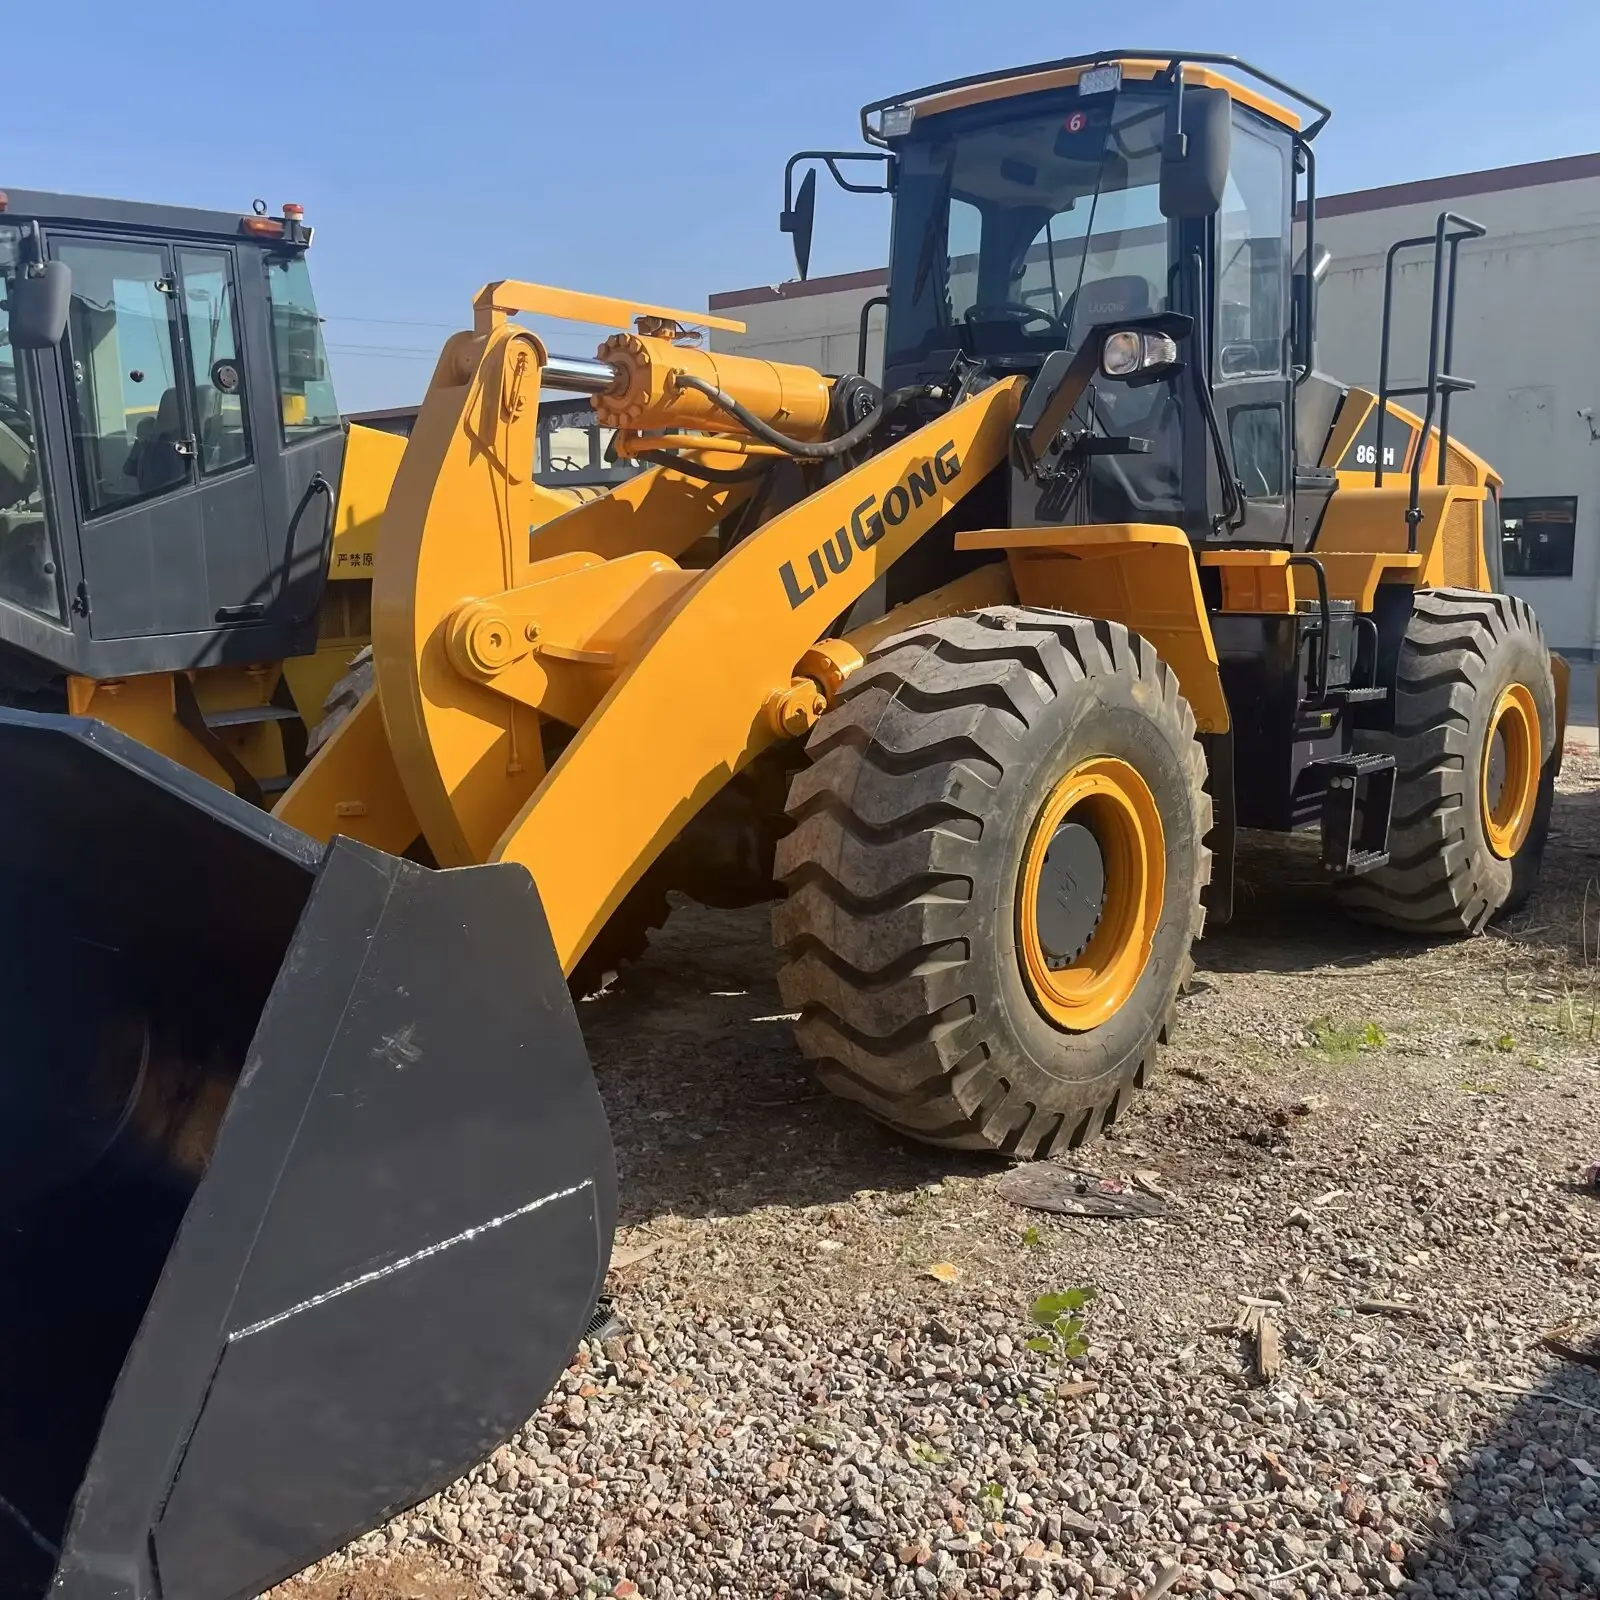 Used LiuGong 50 60 Loader LiuGong CLG856H 862H Used 5 tons 6 tons Pilot EFI Shovels Quality assurance for one year